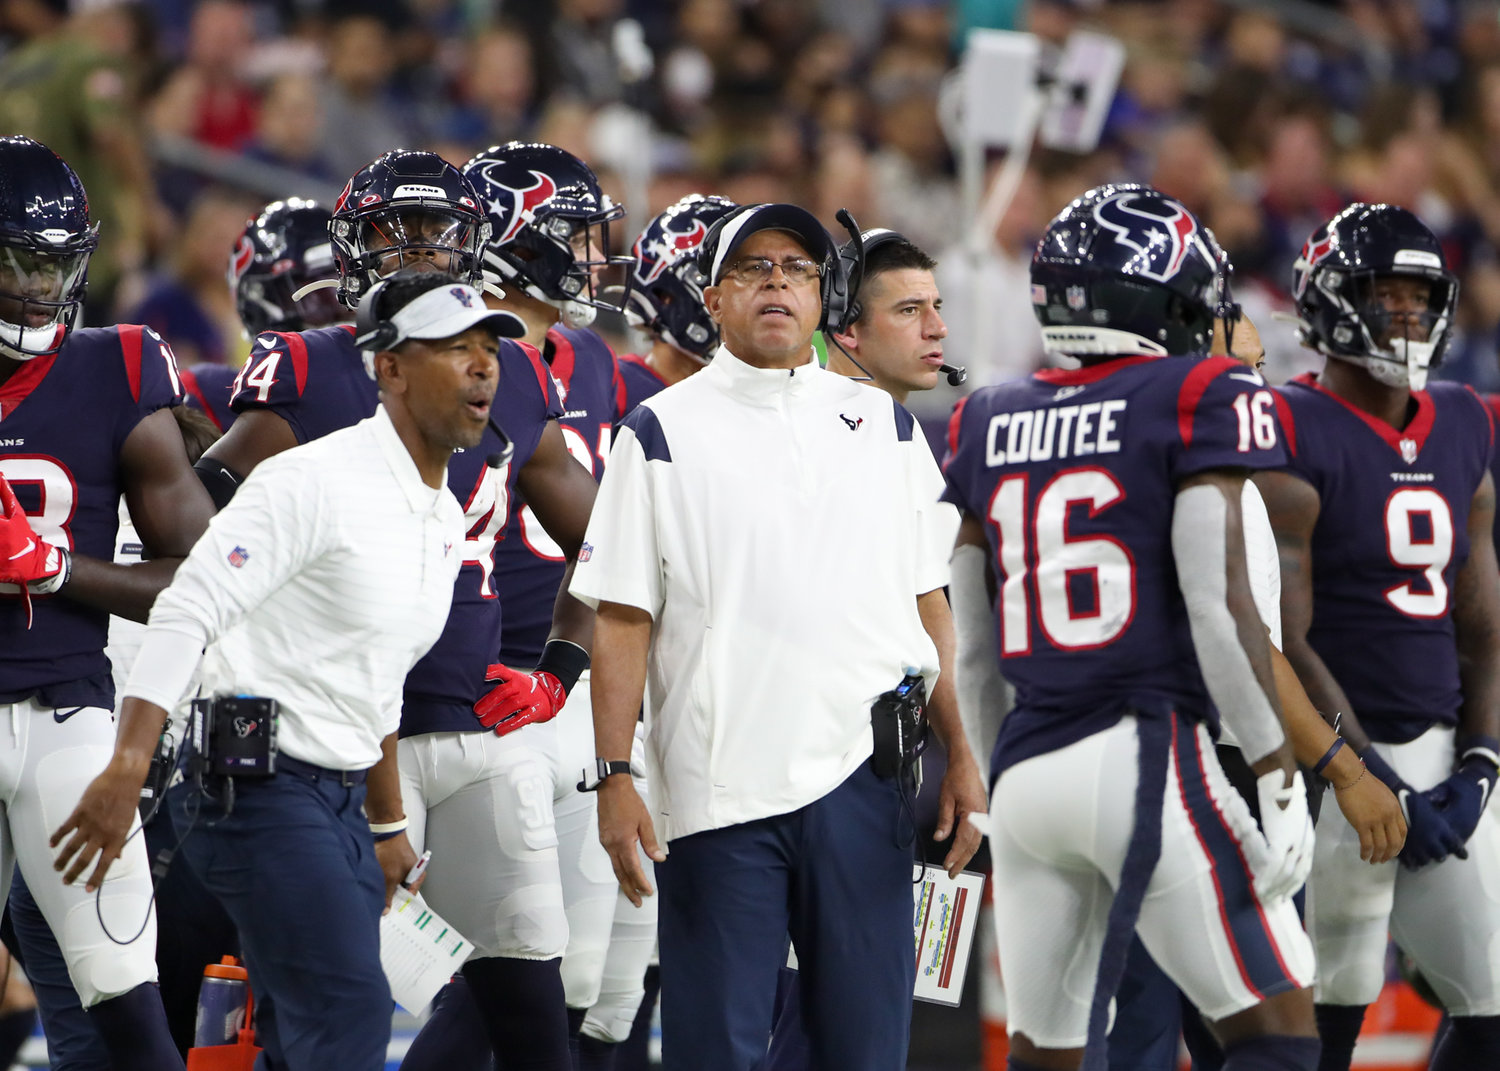 Houston Texans head coach David Culley during an NFL preseason game between the Houston Texans and the Tampa Bay Buccaneers on August 28, 2021 in Houston, Texas.